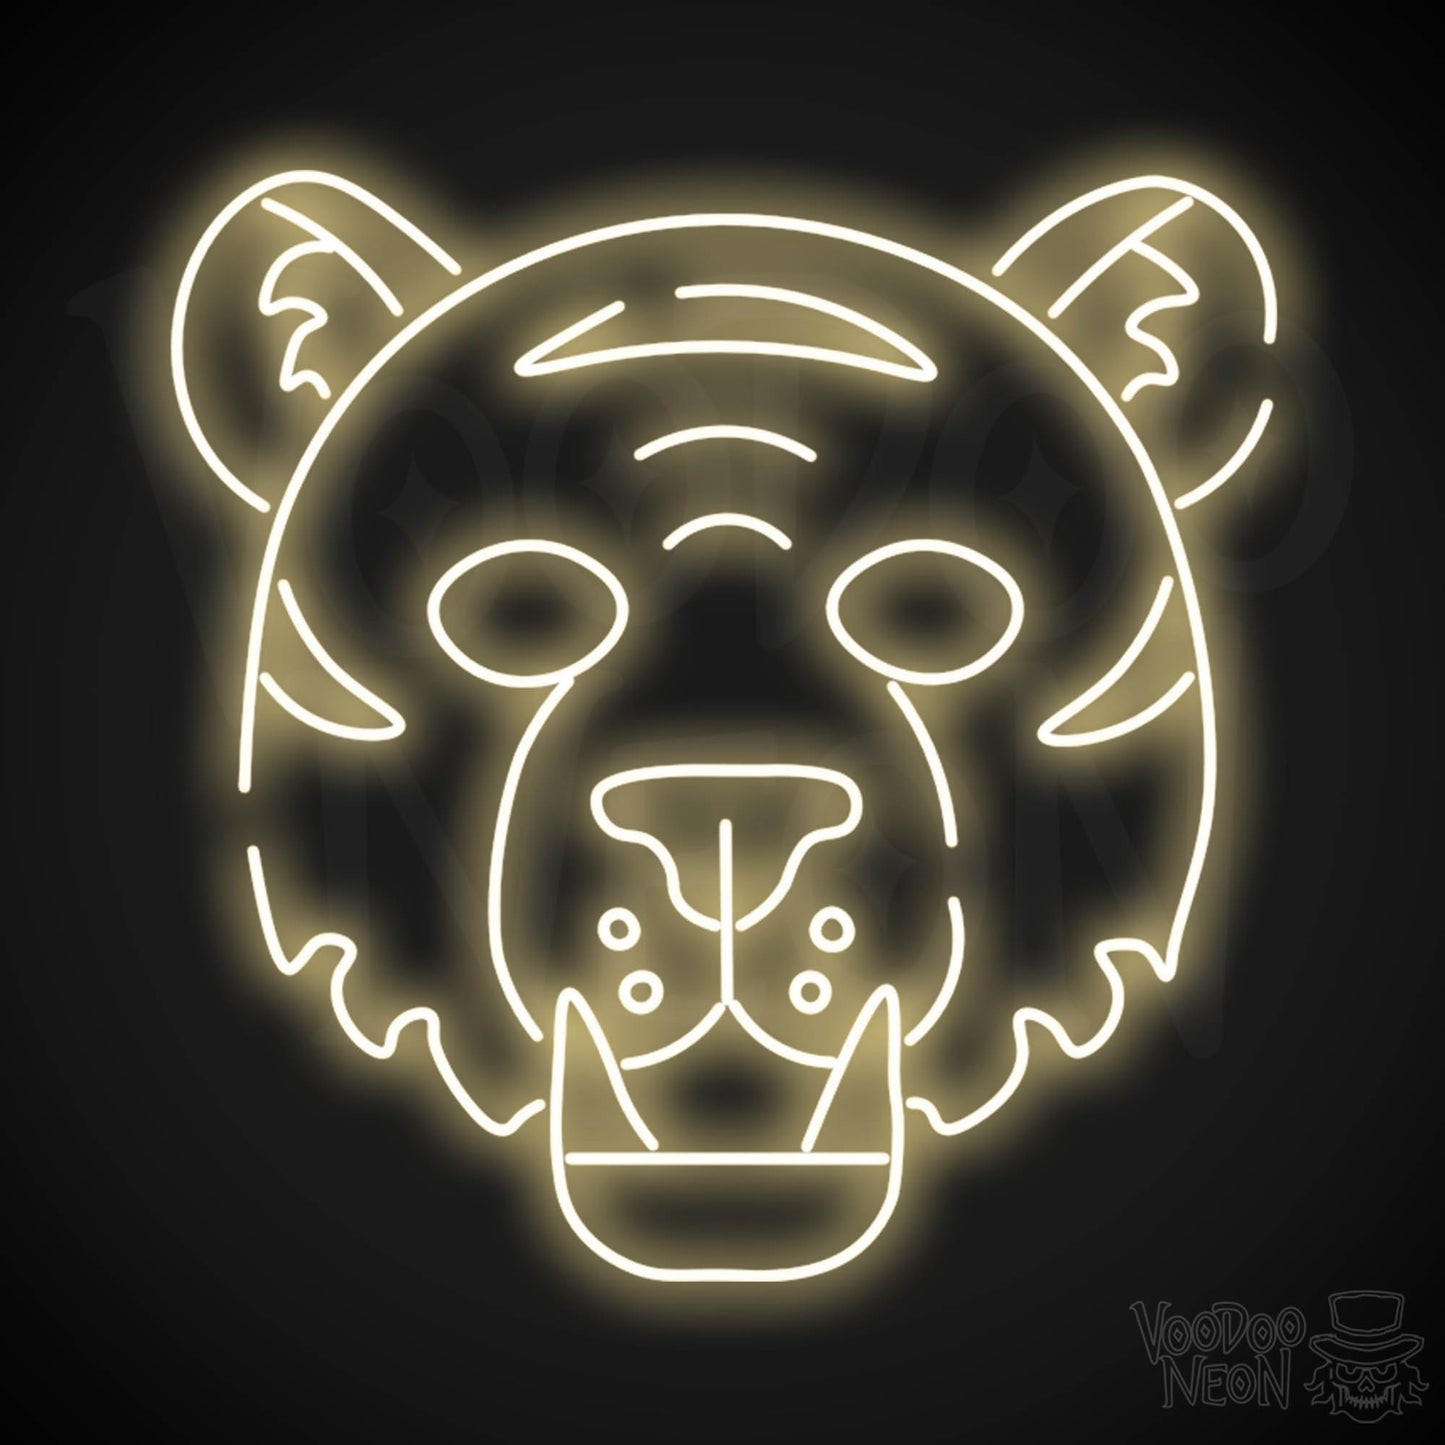 Neon Tiger Wall Art - Neon Tiger Sign - Tiger Neon Sign - LED Sign - Color Warm White